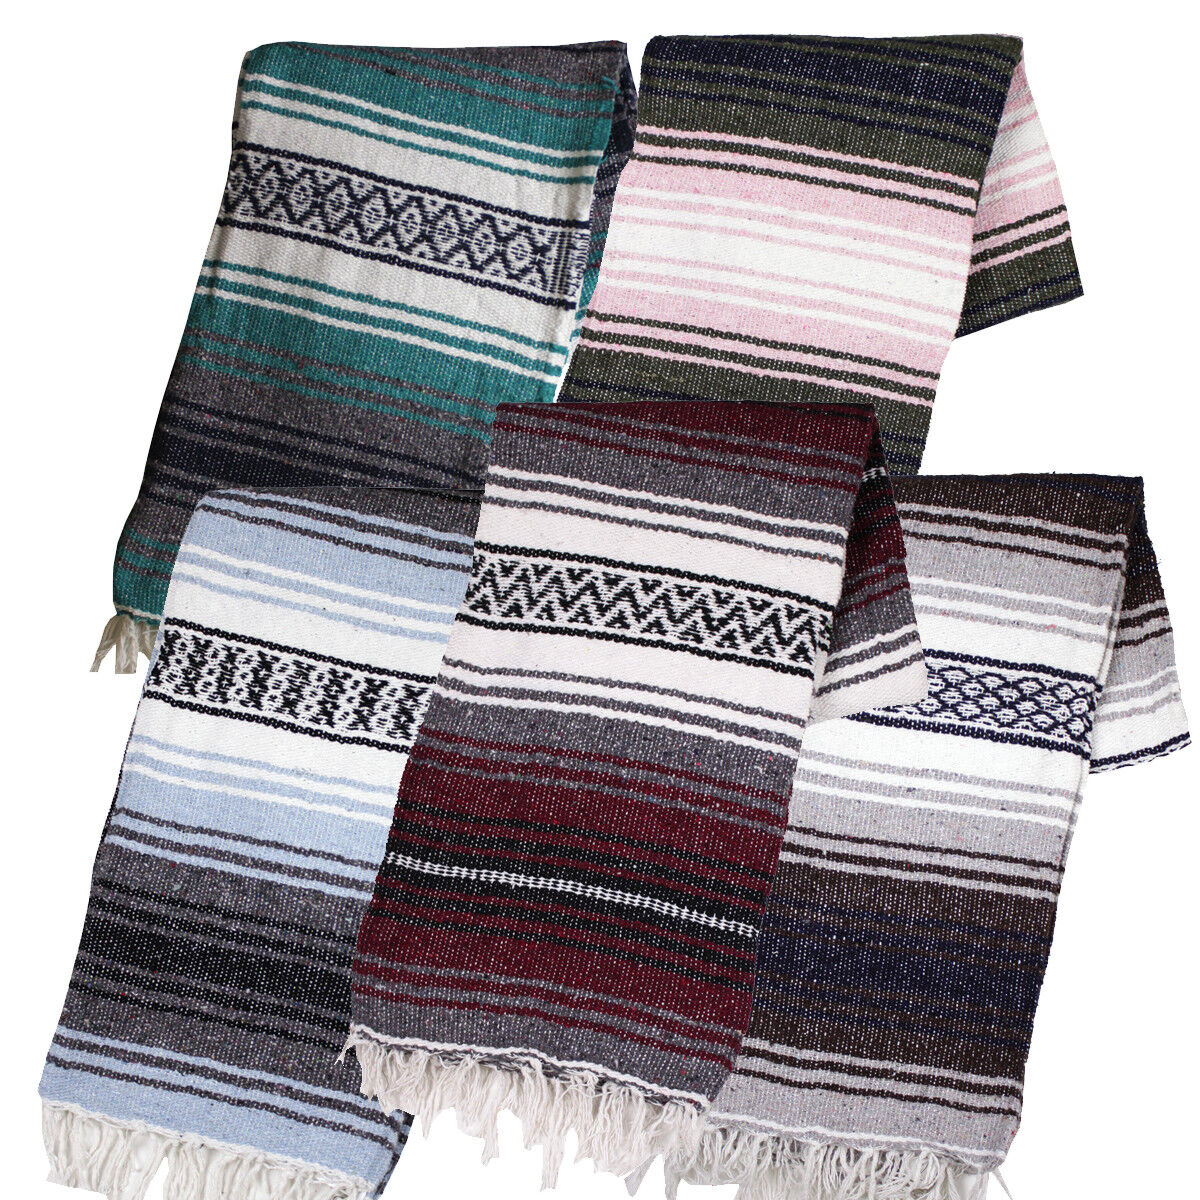 Two (2) Falsa Blankets - Authentic Mexican 74” x 50” Random colors Без бренда